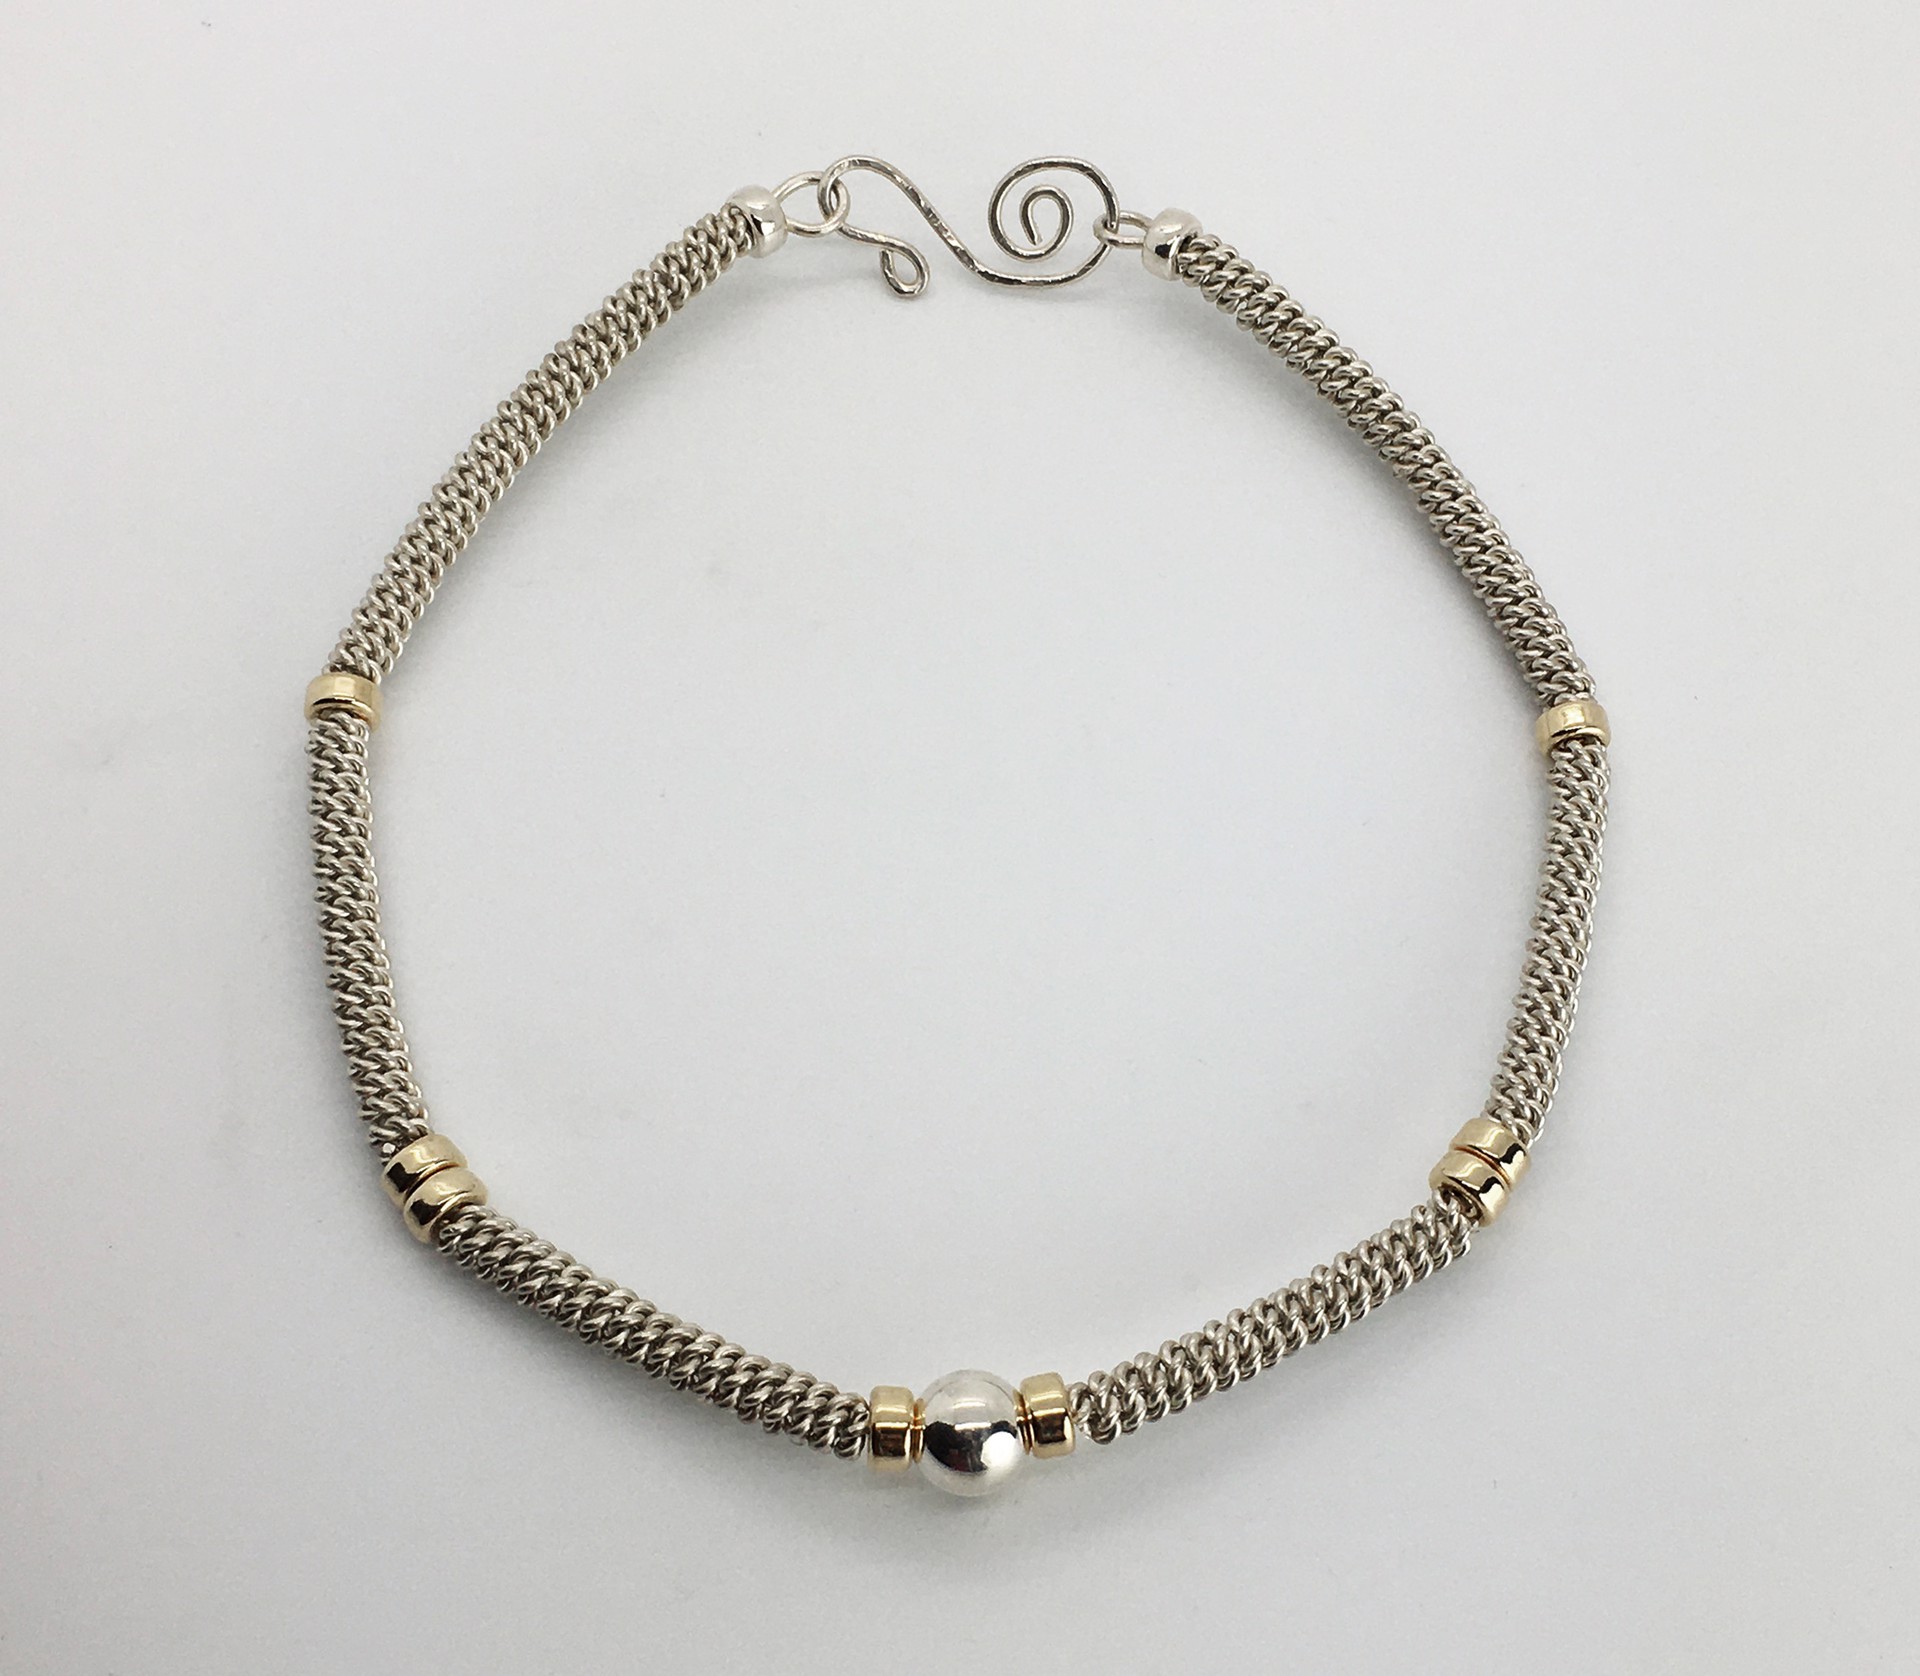 Woven Sterling Silver Neck Cuff with Gold Plated Rondelles & Silver Beads by Suzanne Woodworth